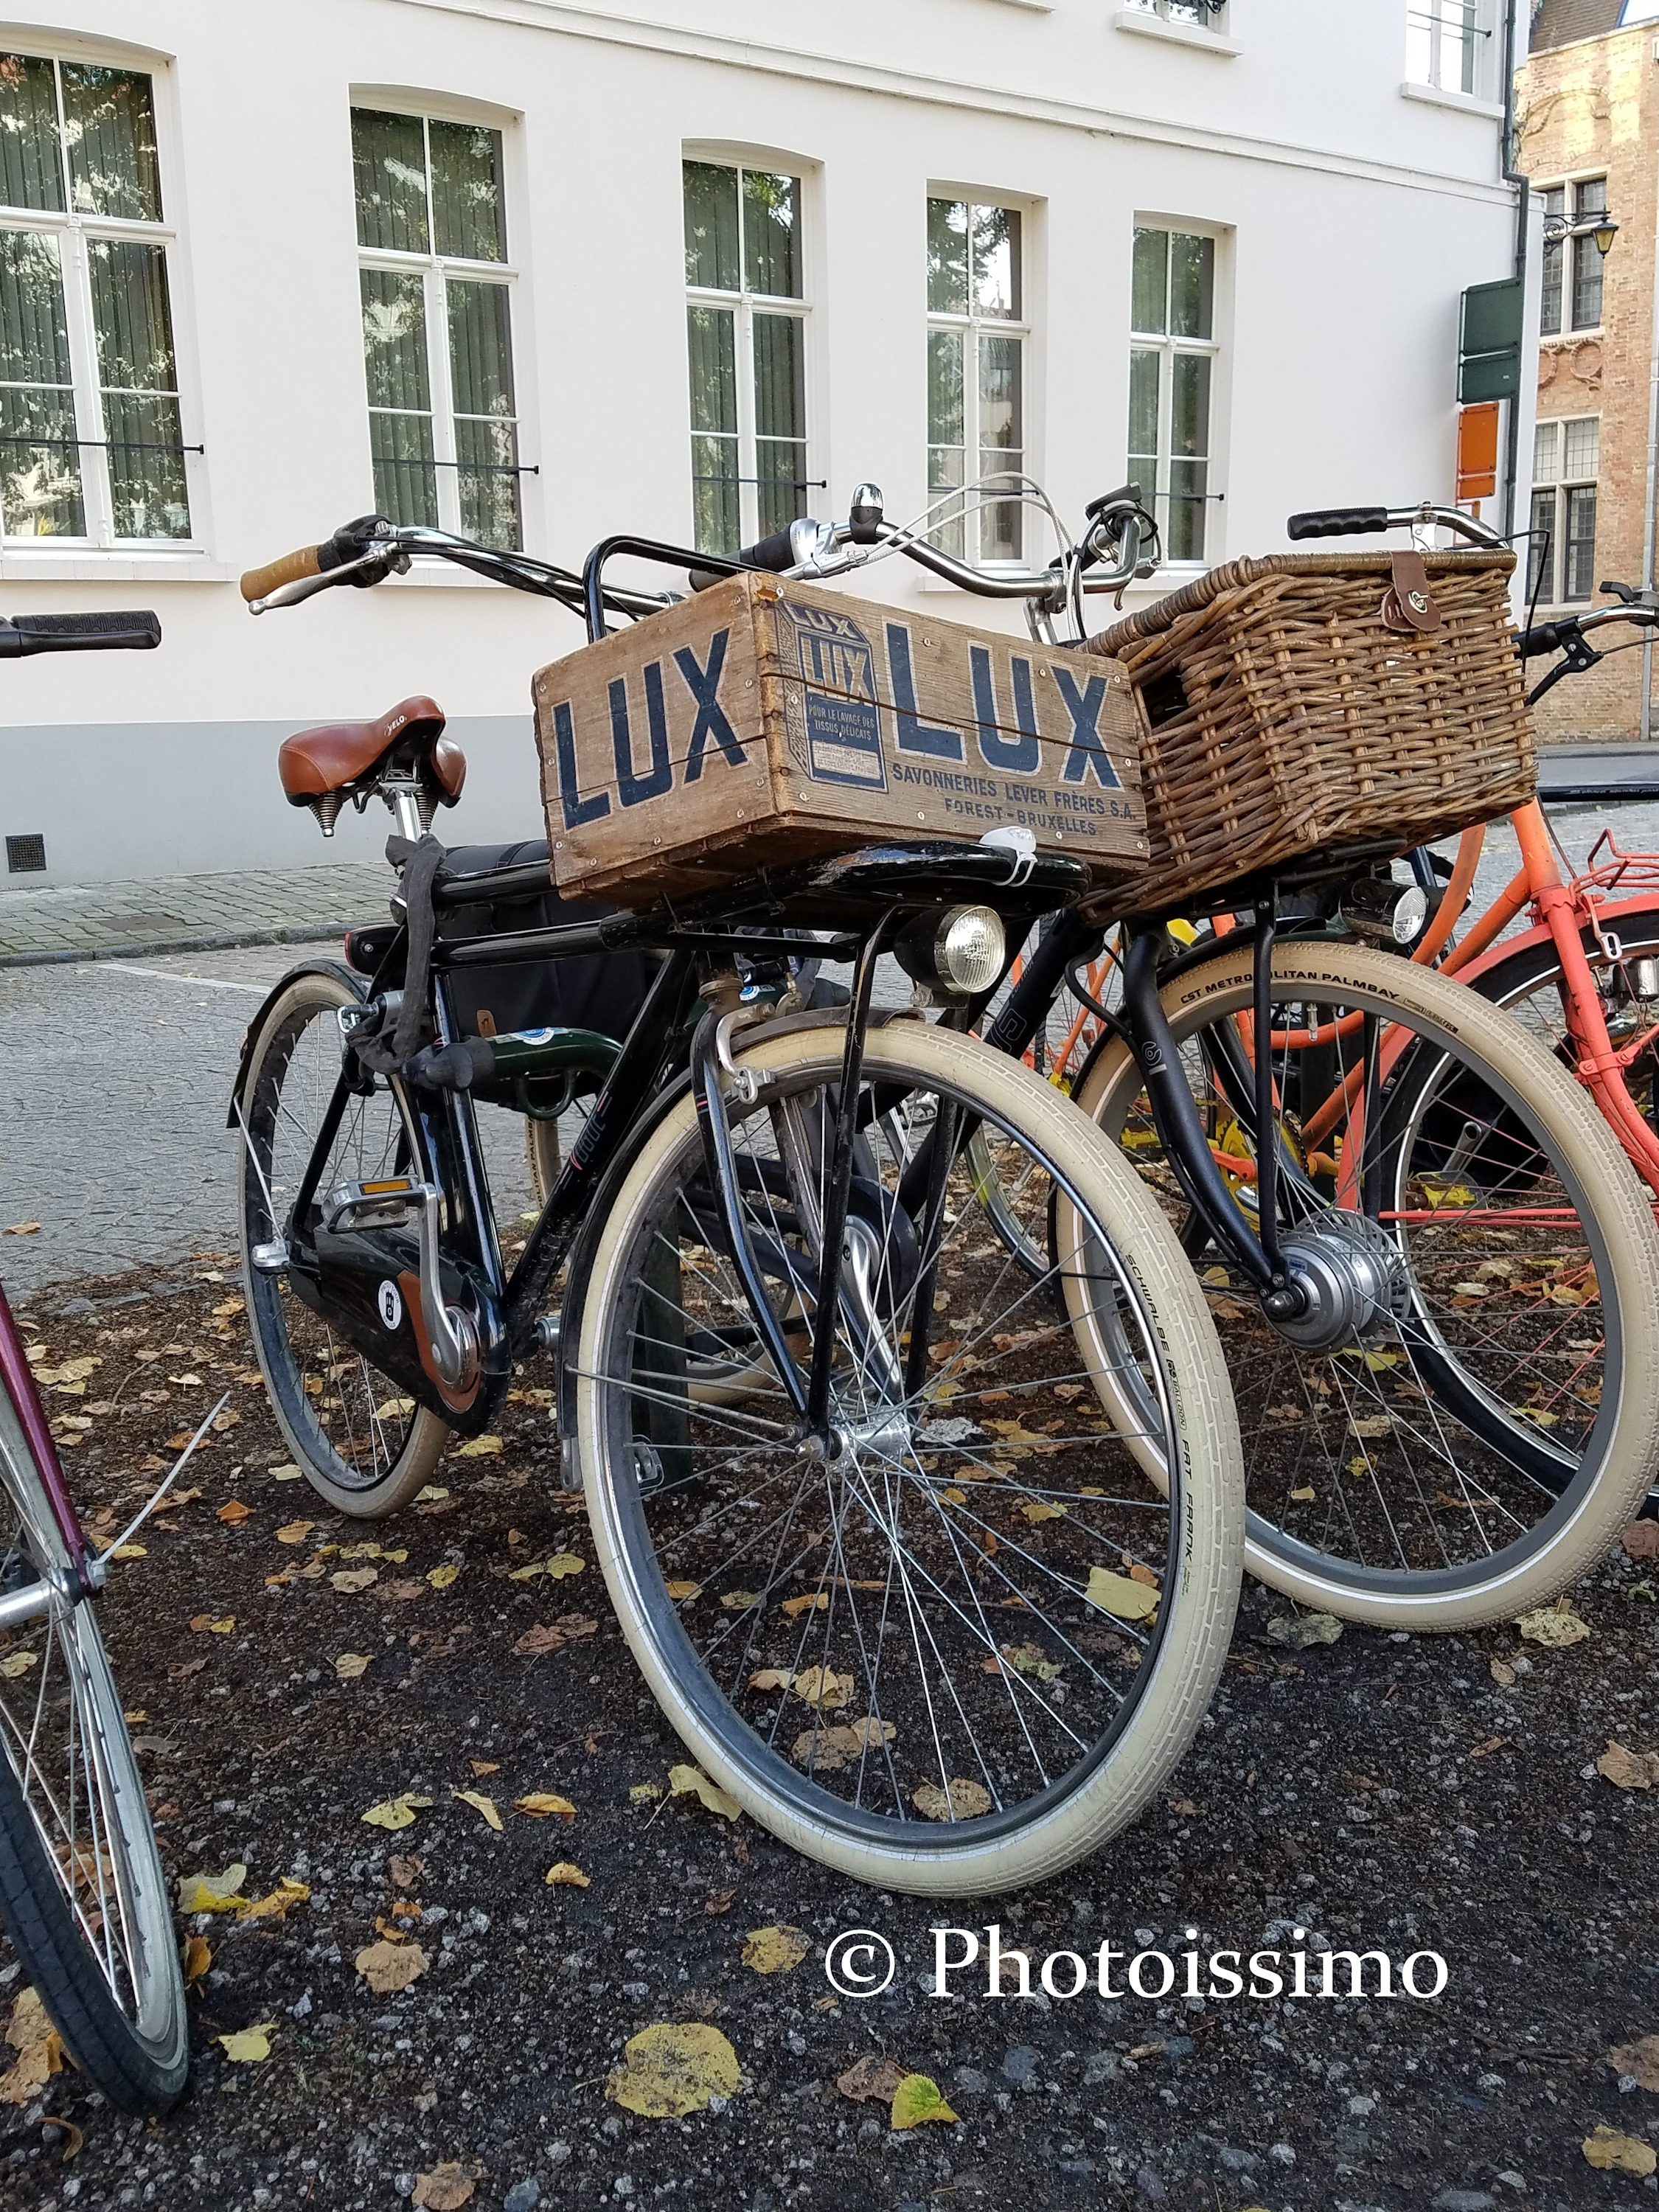 Bicycle and lux c i2bubc